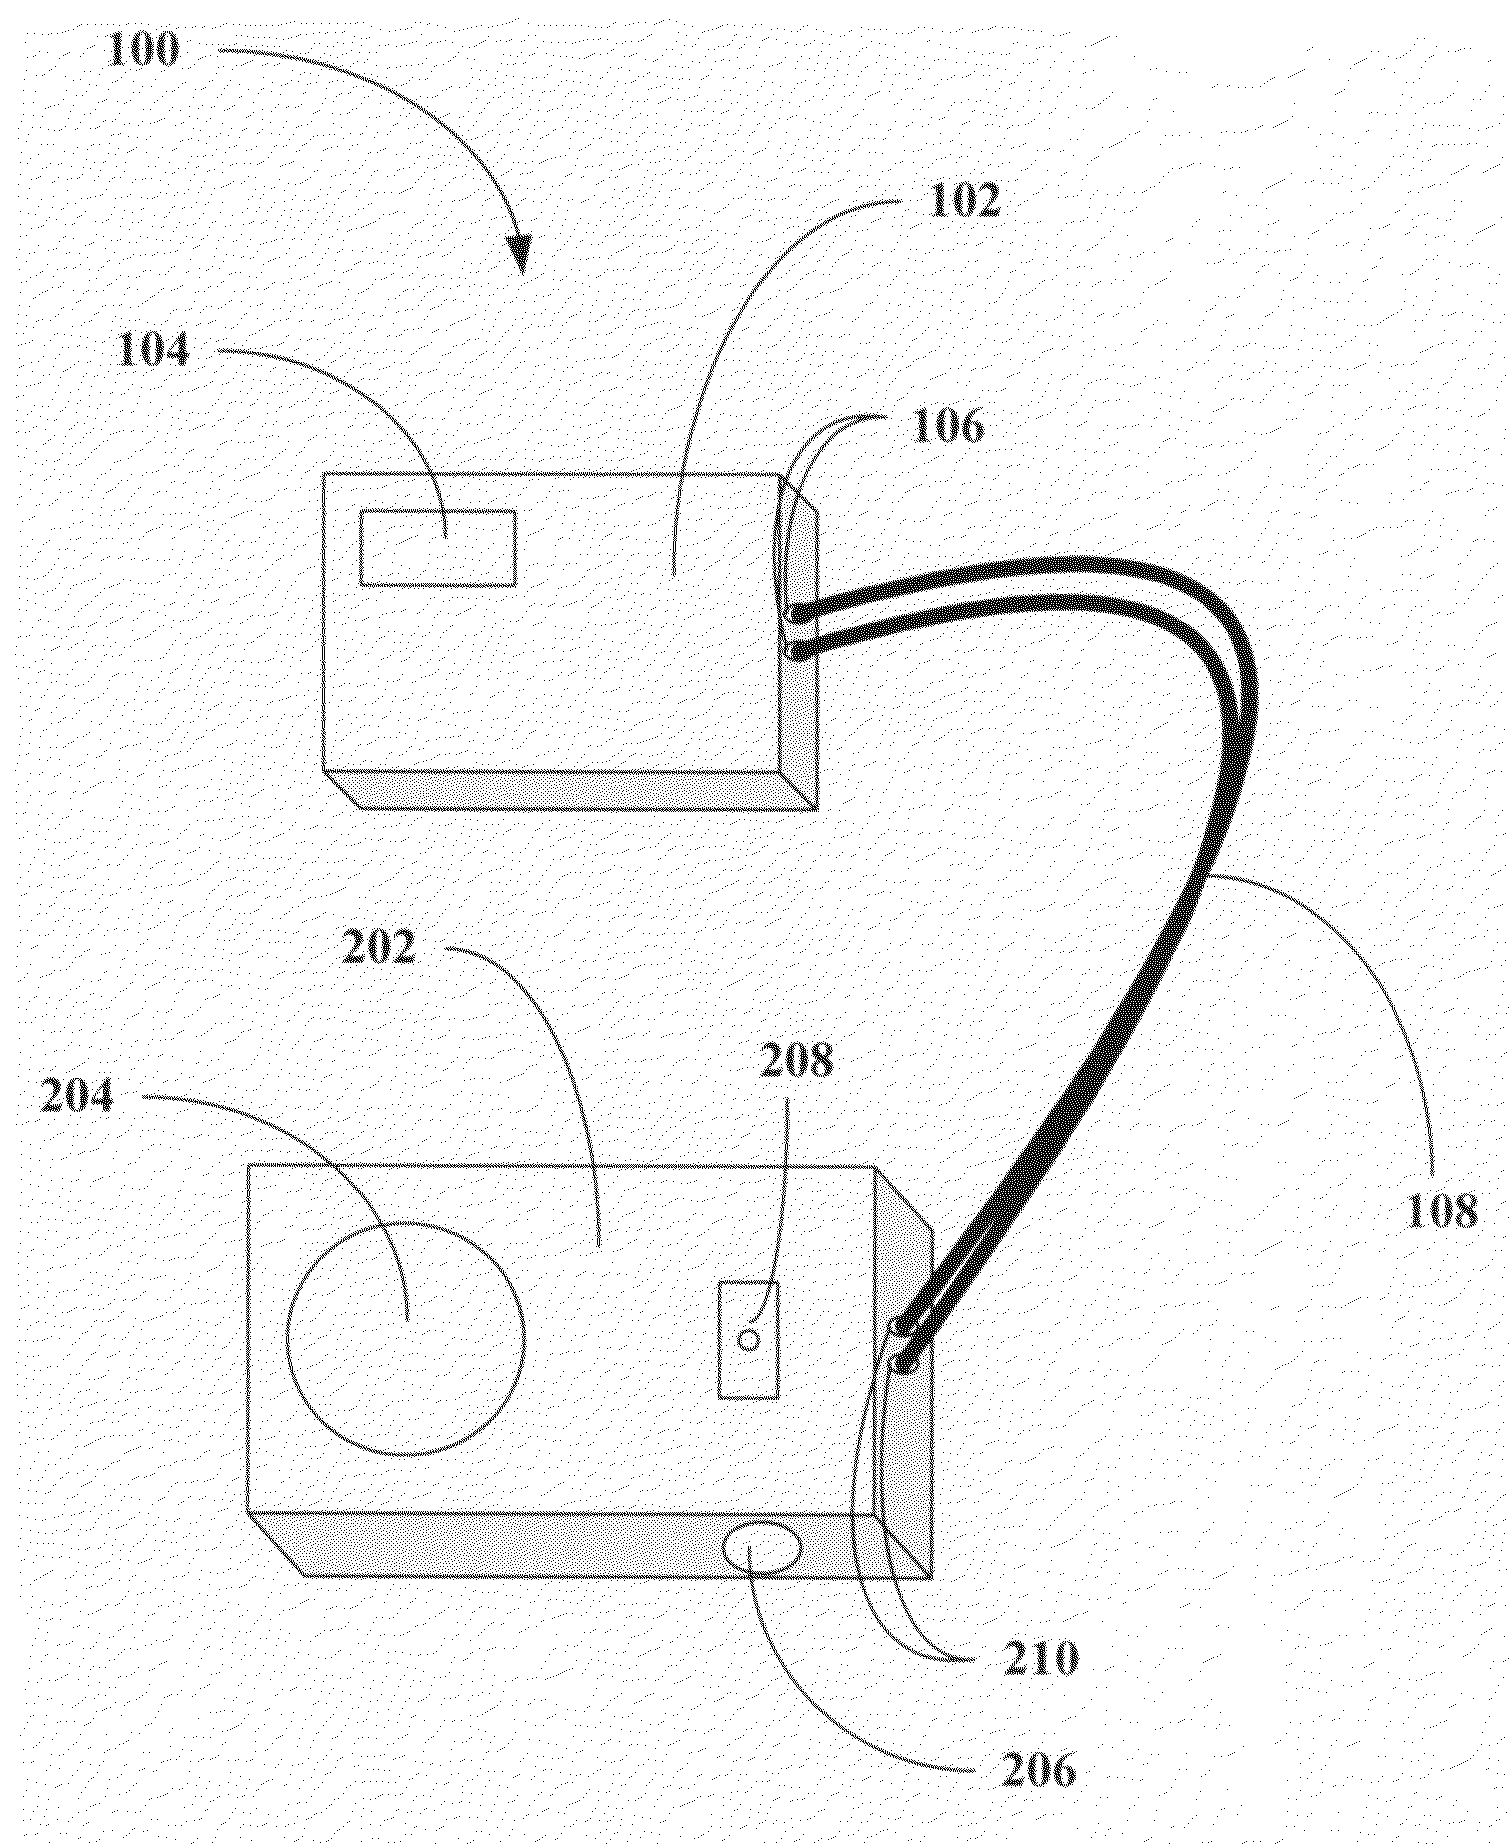 Apparatus for simulating a pulse and heart beat and methods for using same to train medical professionals